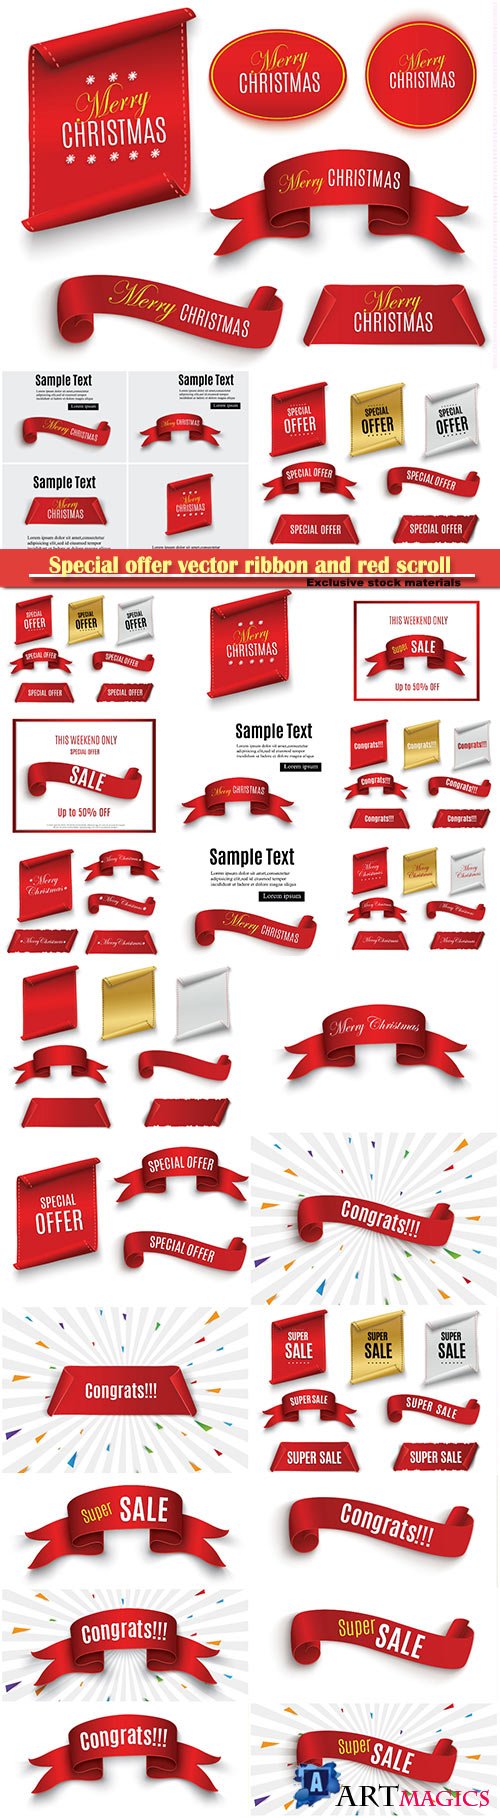 Special offer vector ribbon and red scroll, banner sale tag